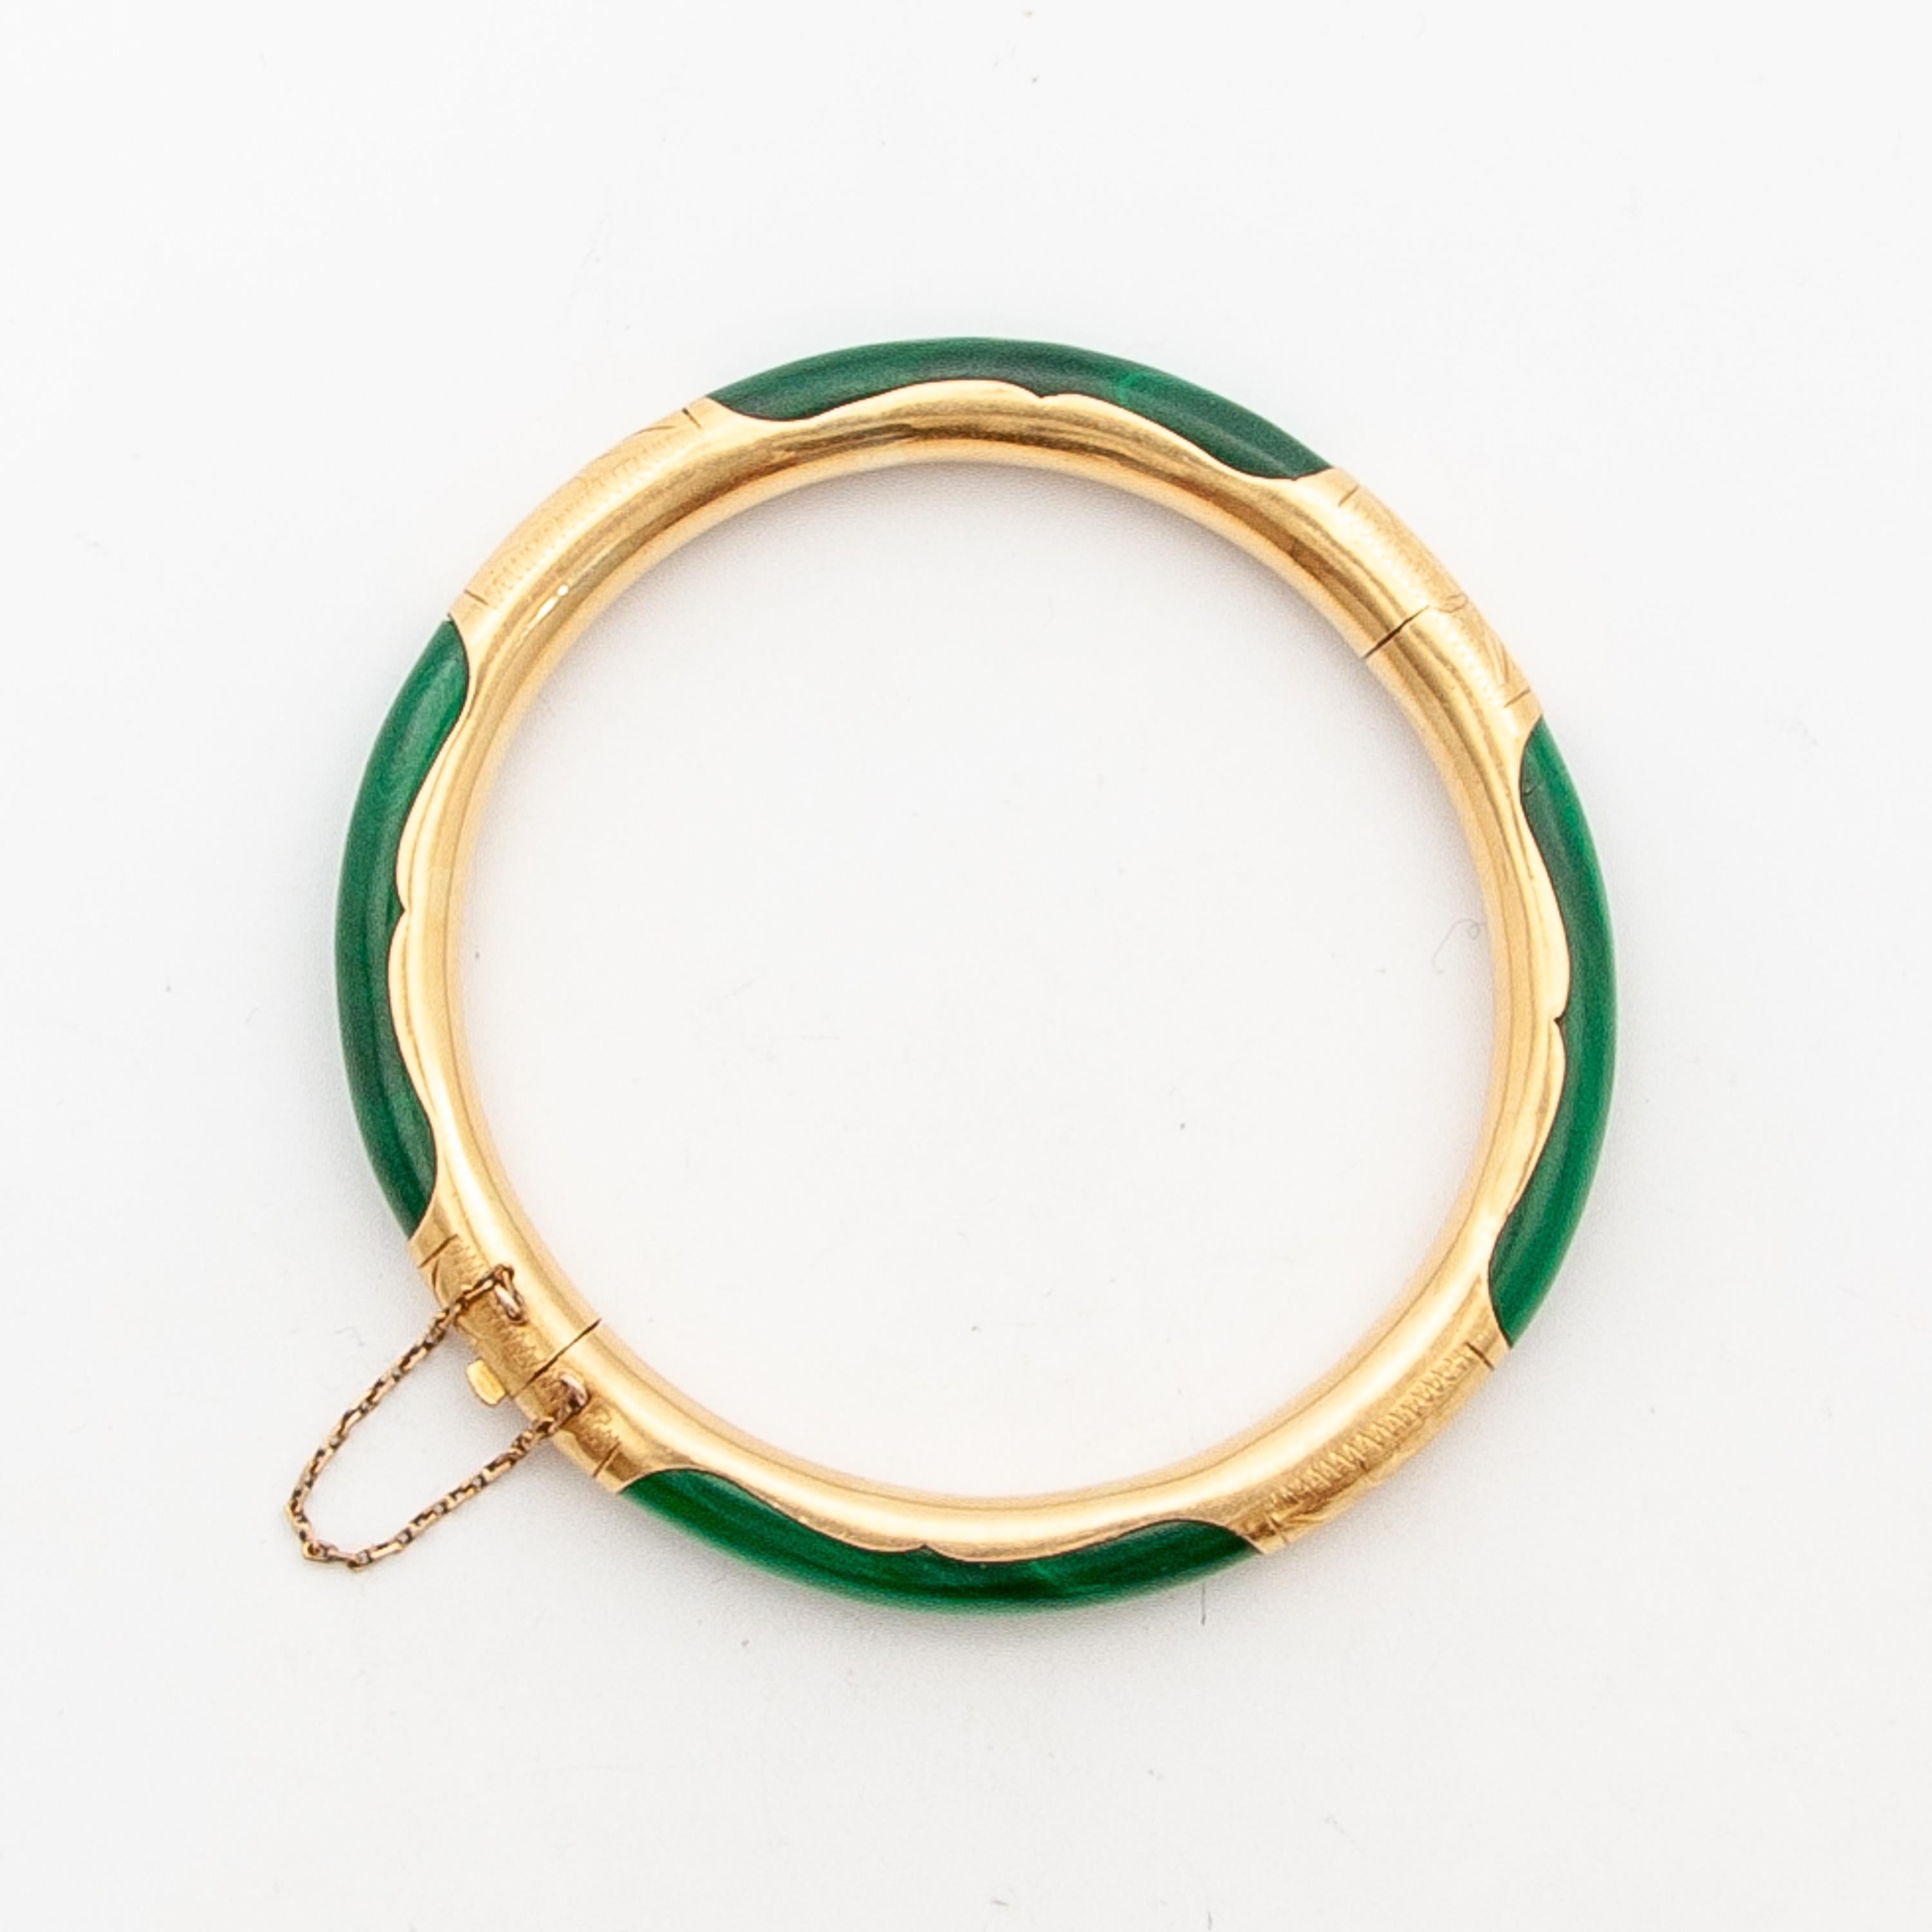 An 18 karat gold etched Malachite hinged bangle bracelet. This lovely bangle features a smooth round polished stone with mixed green tones. The 18 karat gold engraved foliage compartments accentuate the Malachite sections. The bangle bracelet is